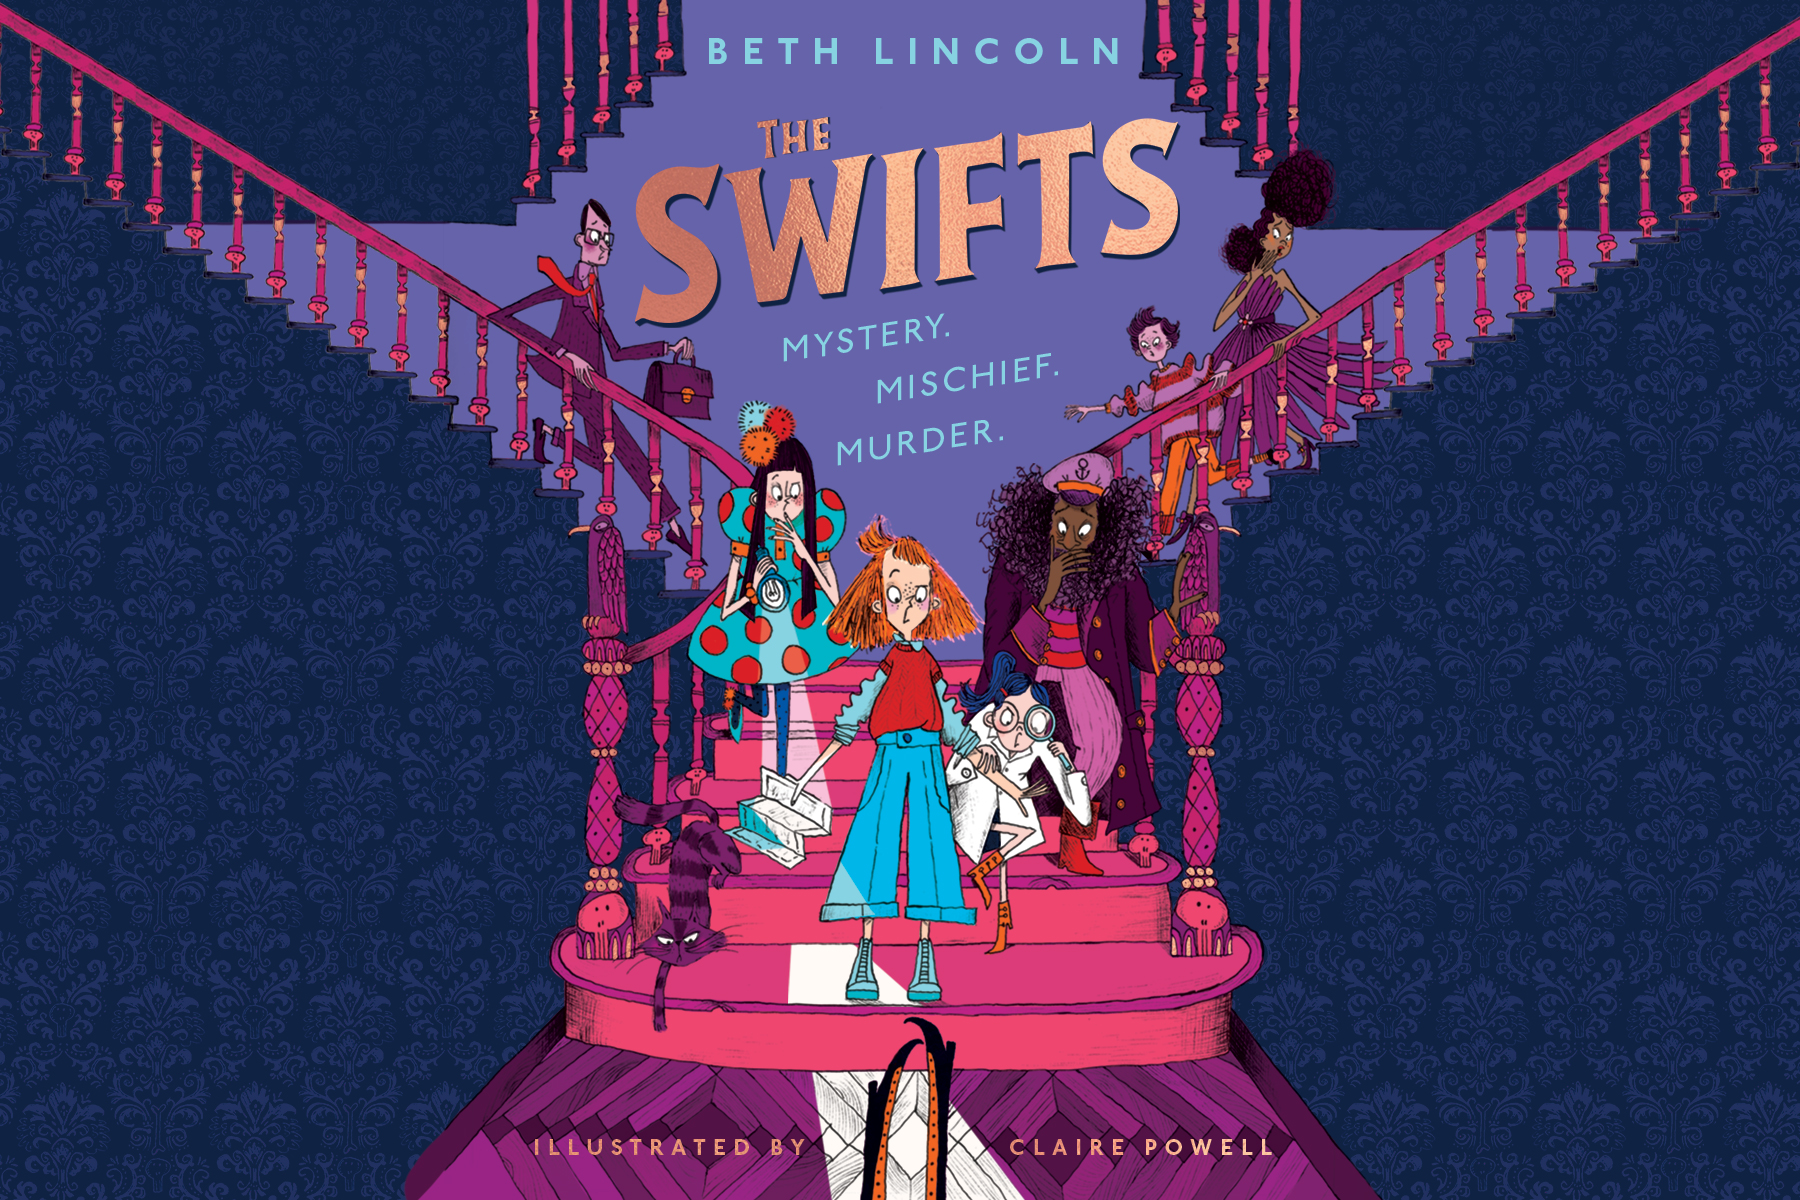 An image of the artwork of the front cover of The Swifts by Beth Lincoln. It is an illustration of the characters in The Swifts standing on a staircase.